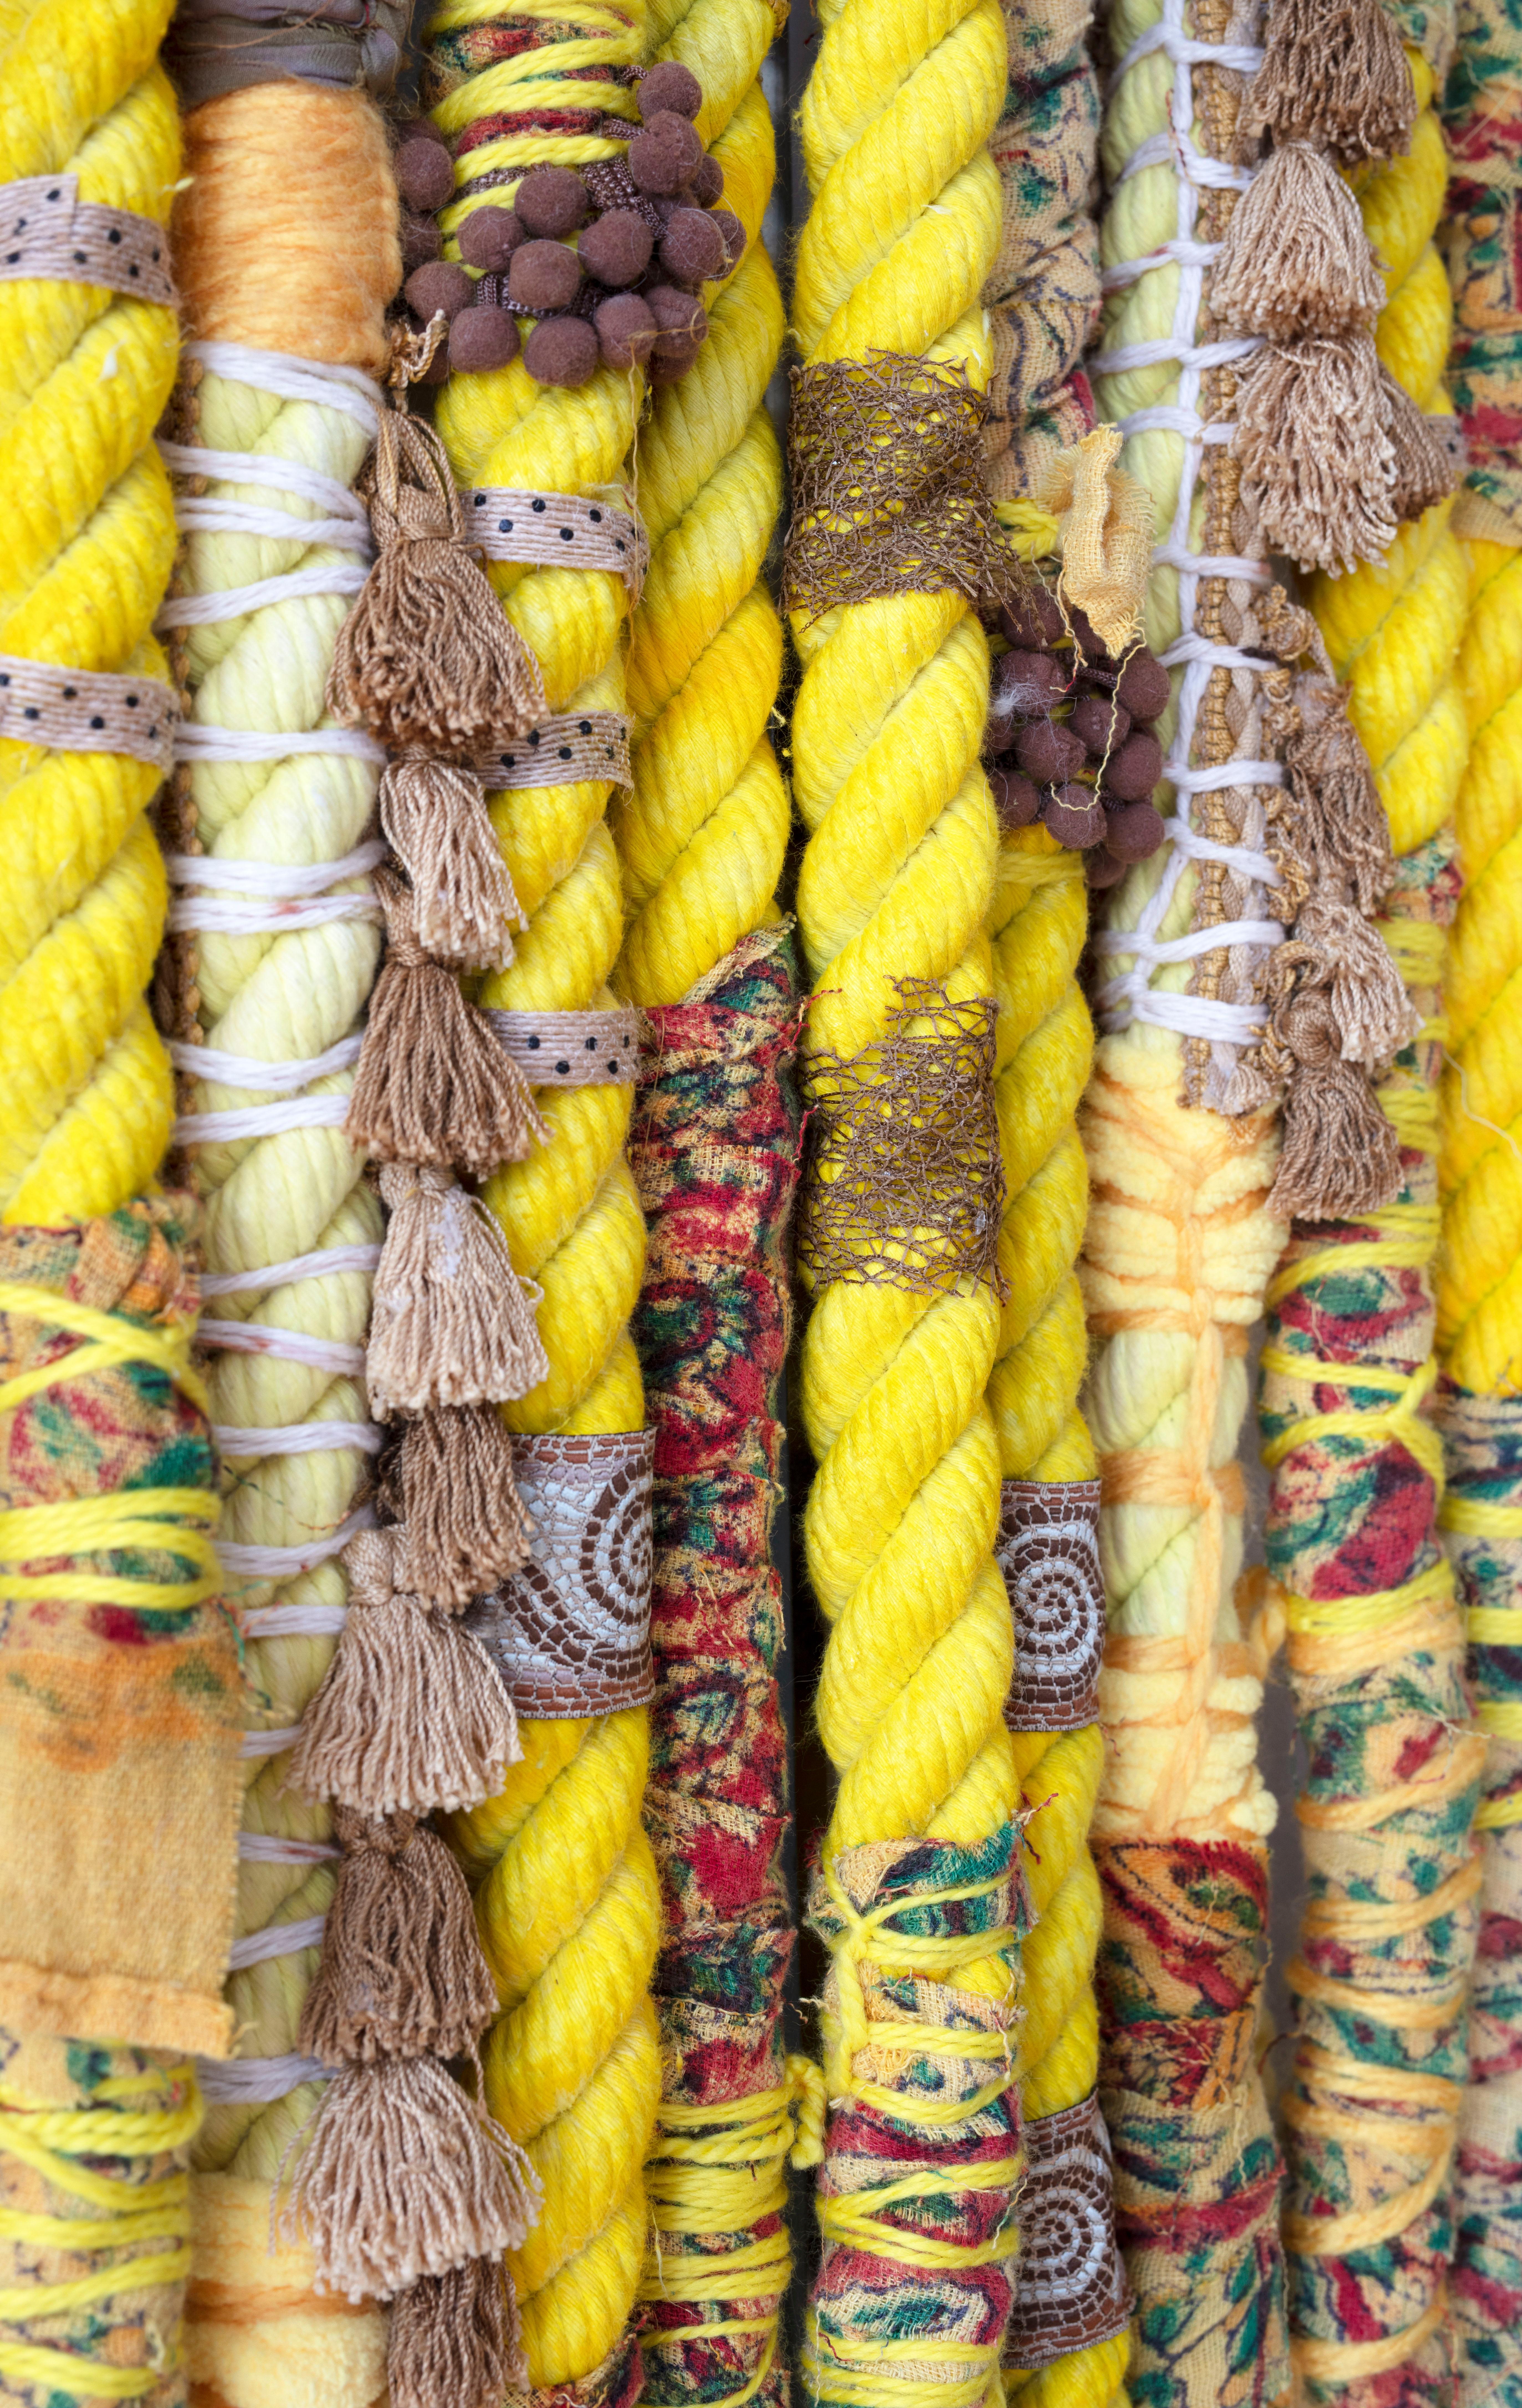 I custom dyed the cotton rope a bright yellow using Jacquard ink, then wrapped the rope with ribbon, pom pom trim, yarn and vintage fabric from a block print tapestry that hung in my college dorm room.

Theda Sandiford, is a self-taught mixed media